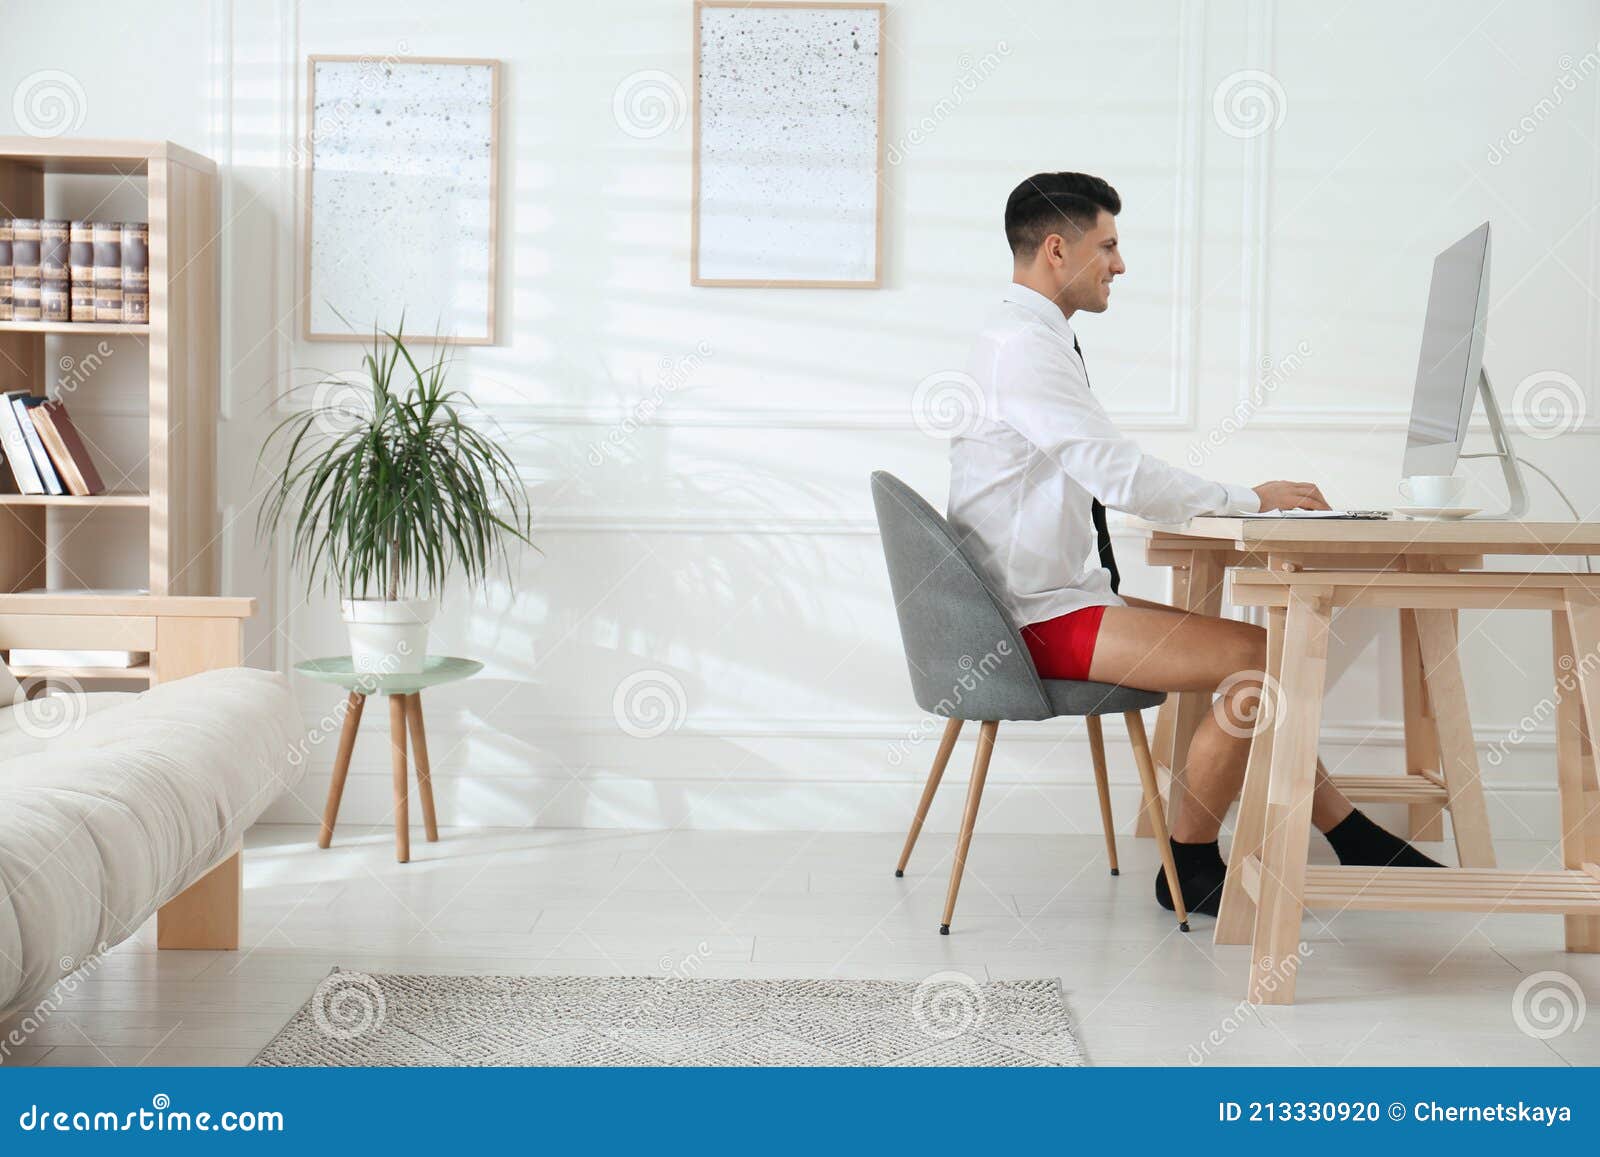 Businessman in Shirt and Underwear Working on Computer at Home Office ...